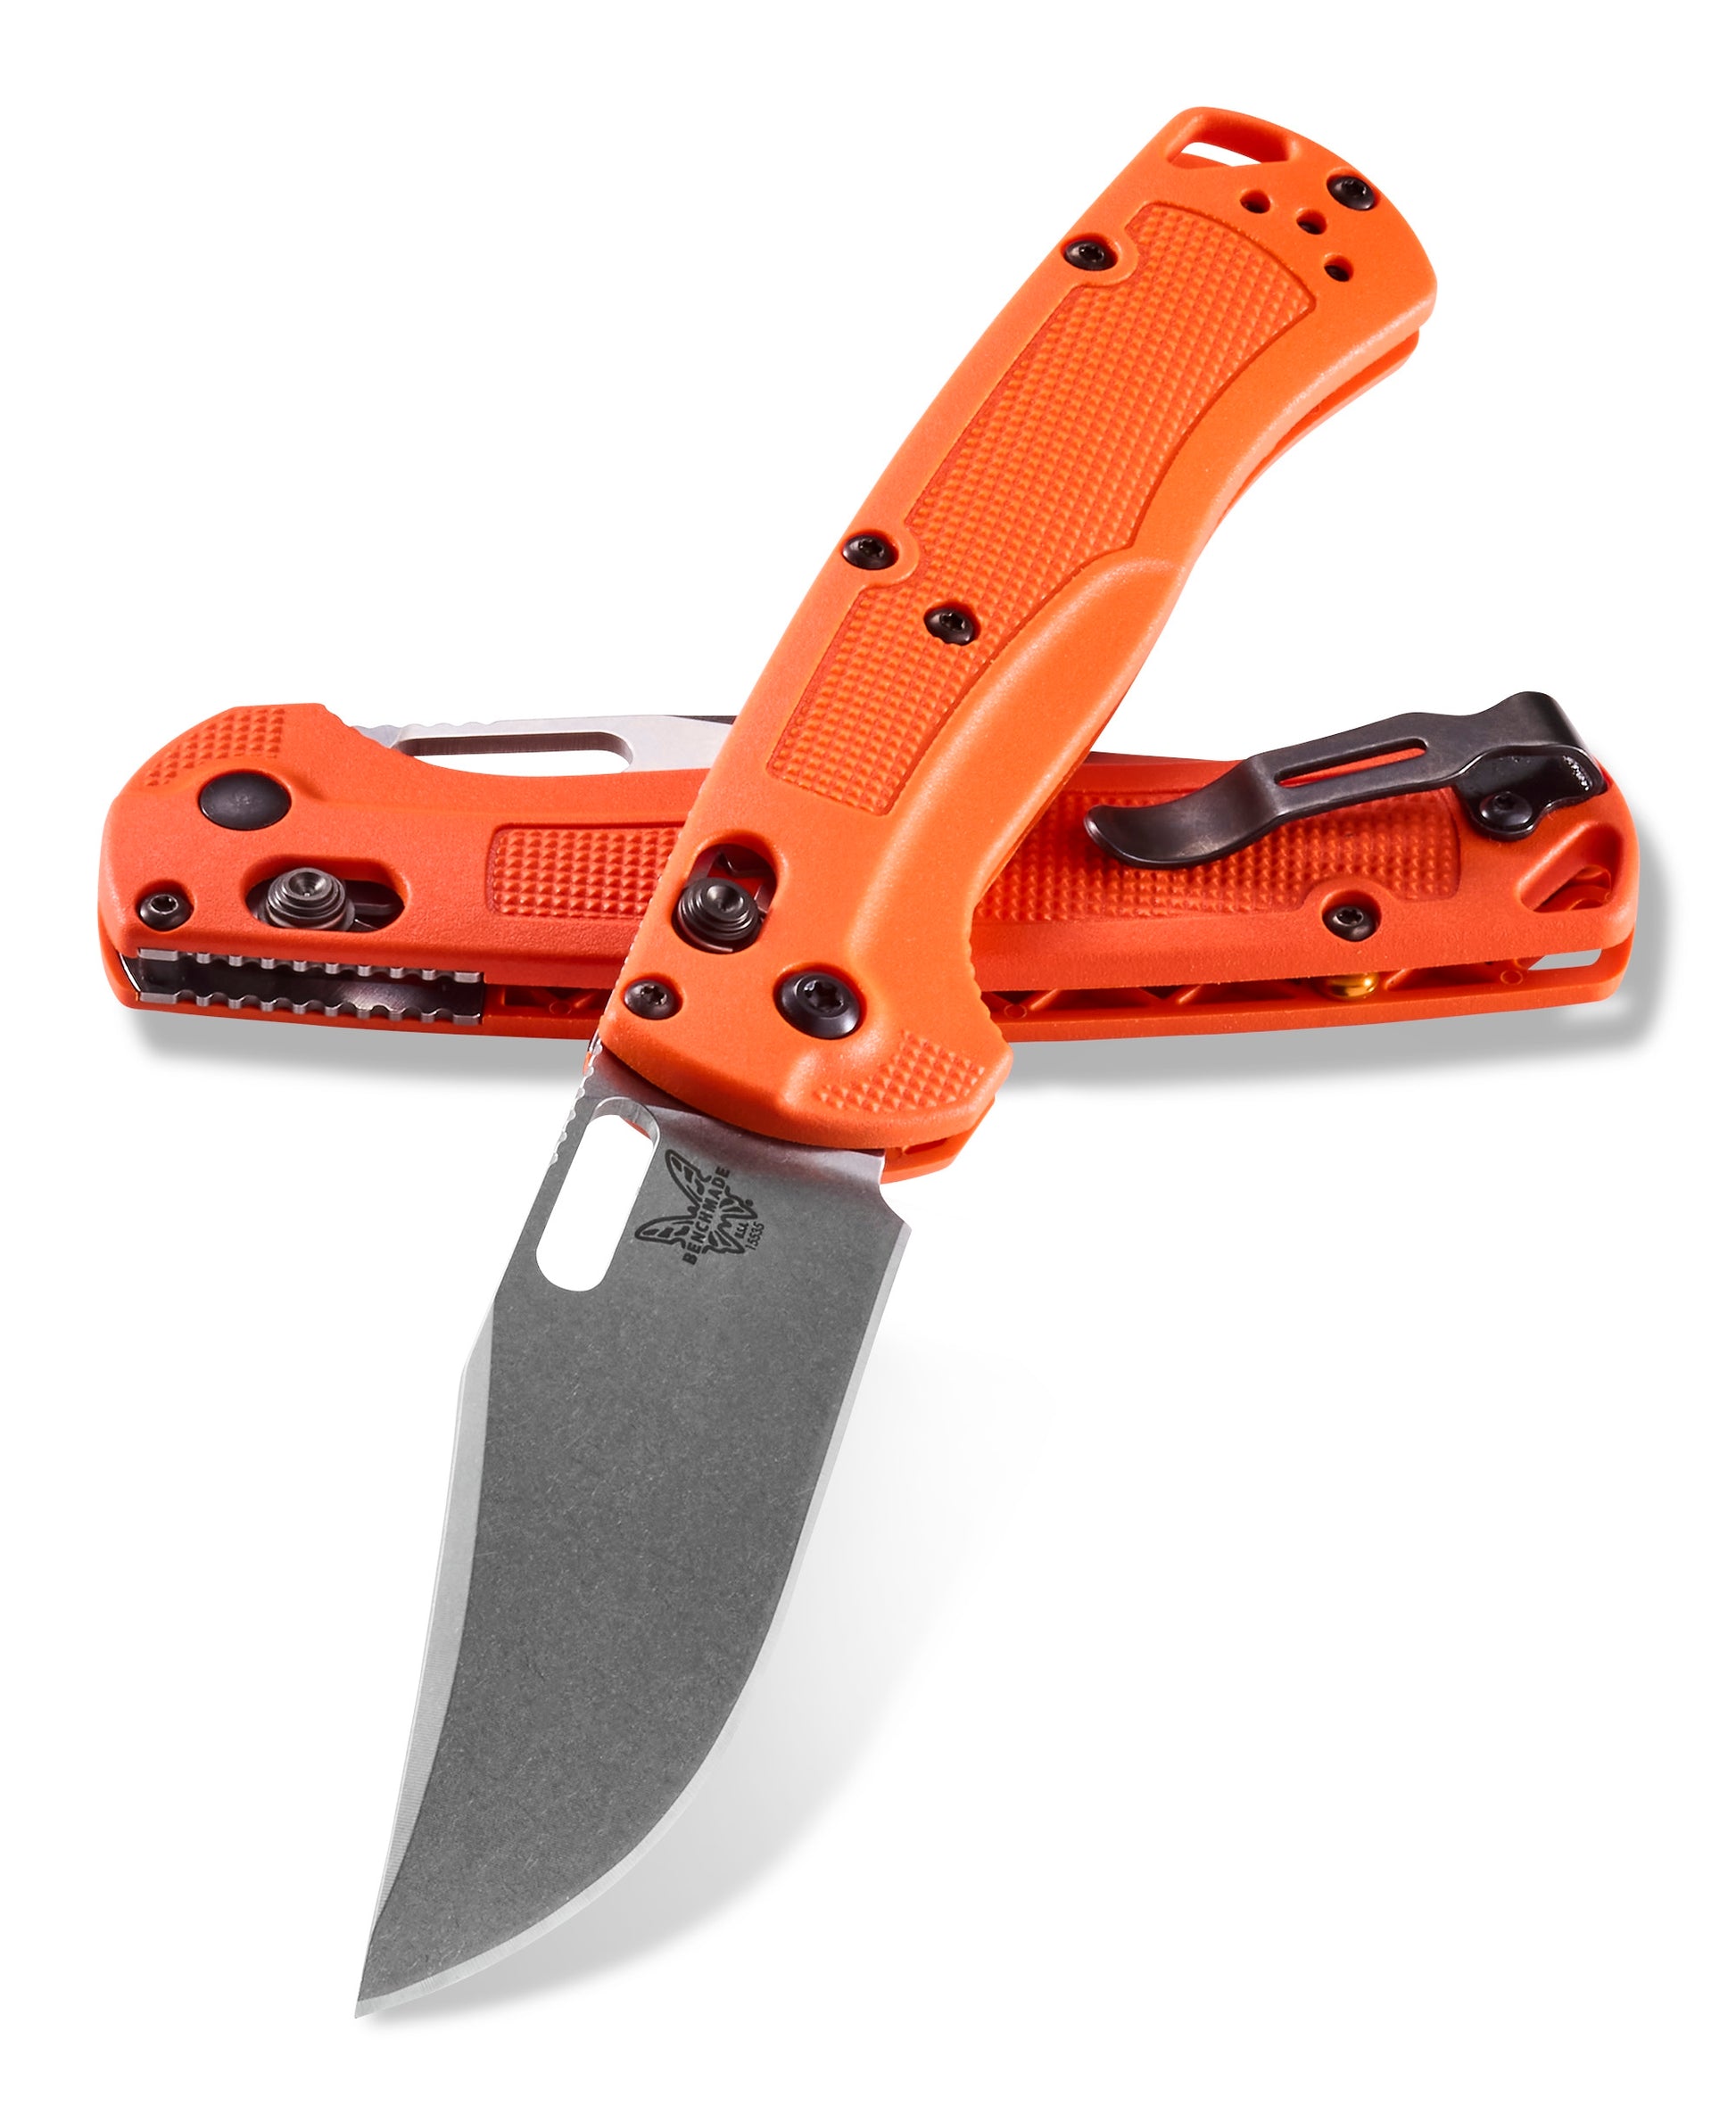 Benchmade TAGGEDOUT orange 1